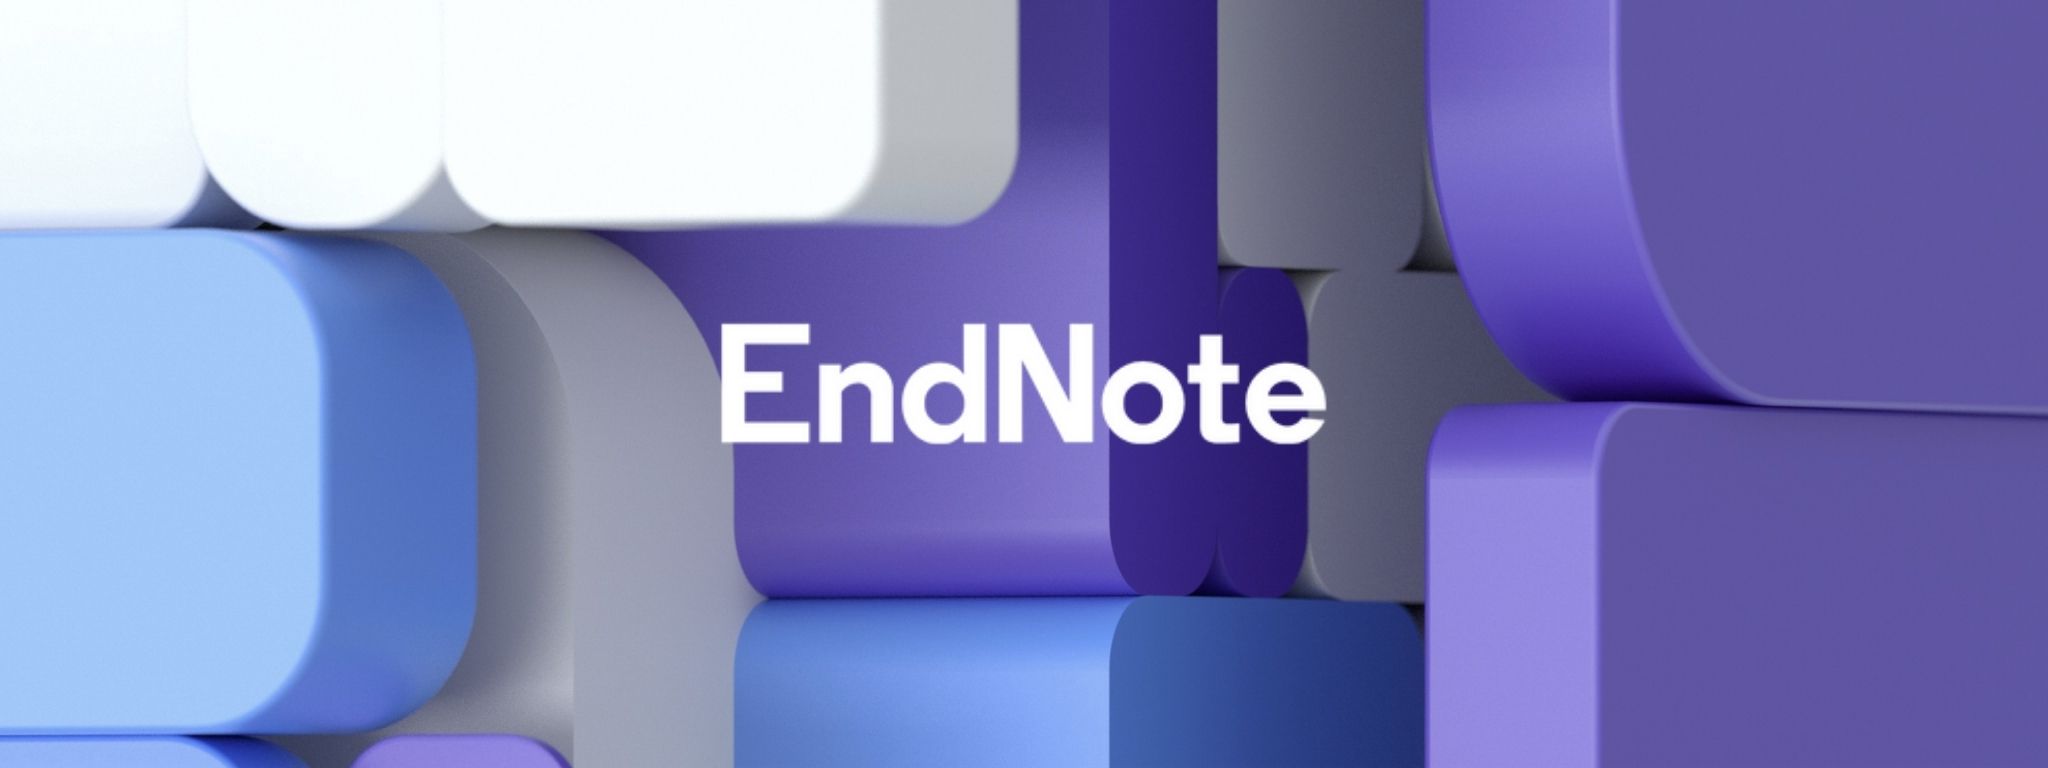 endnote free download